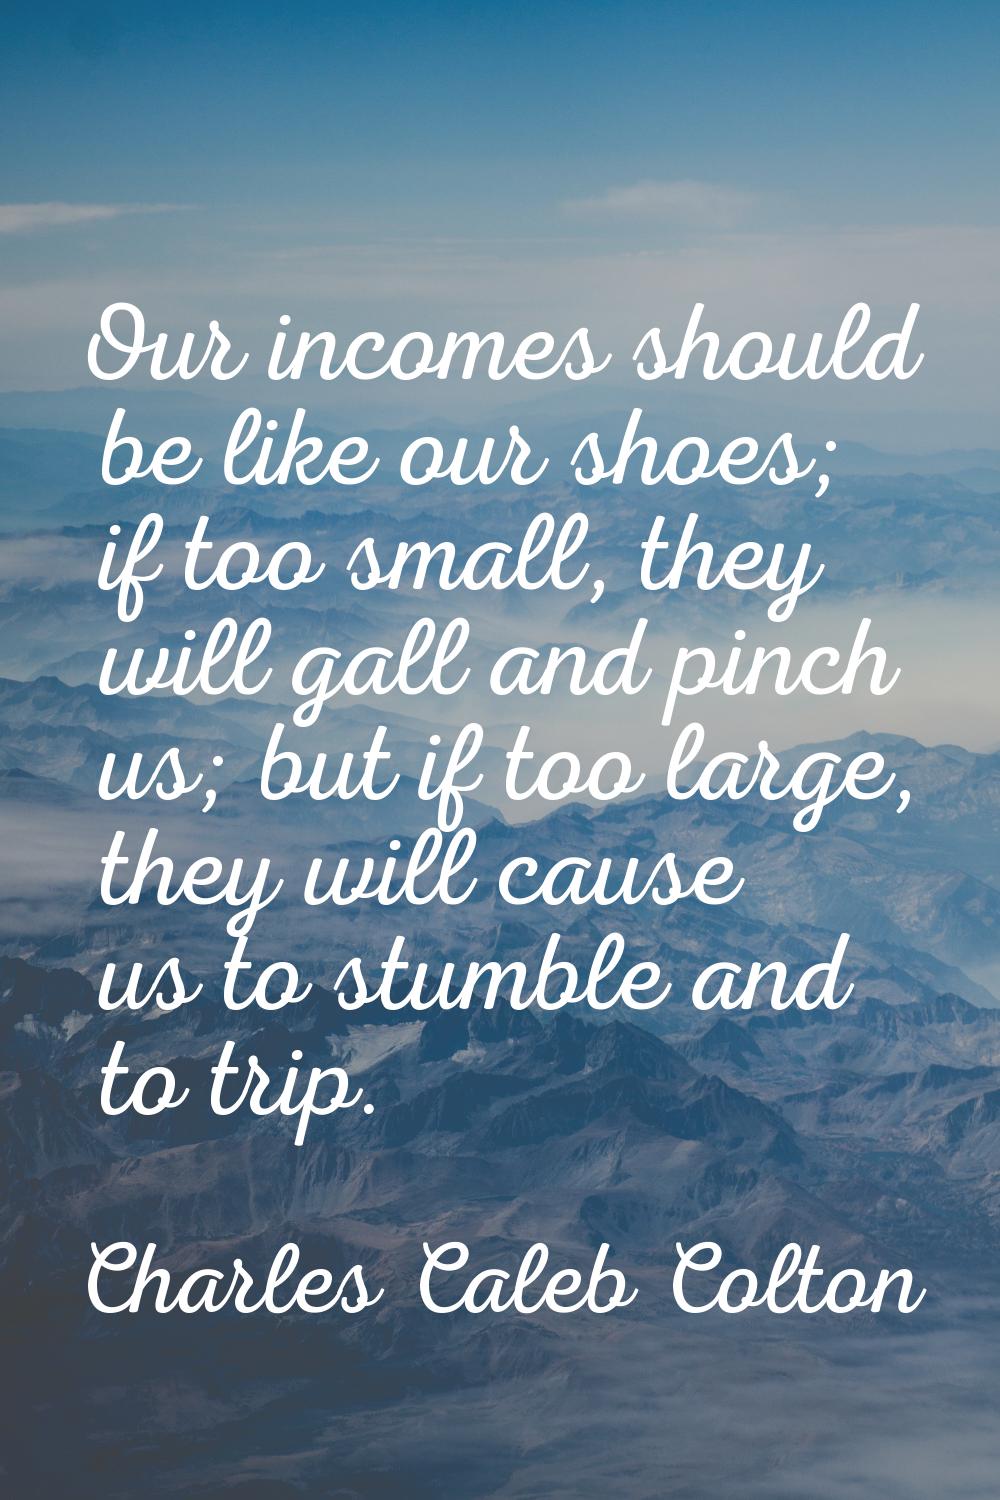 Our incomes should be like our shoes; if too small, they will gall and pinch us; but if too large, 